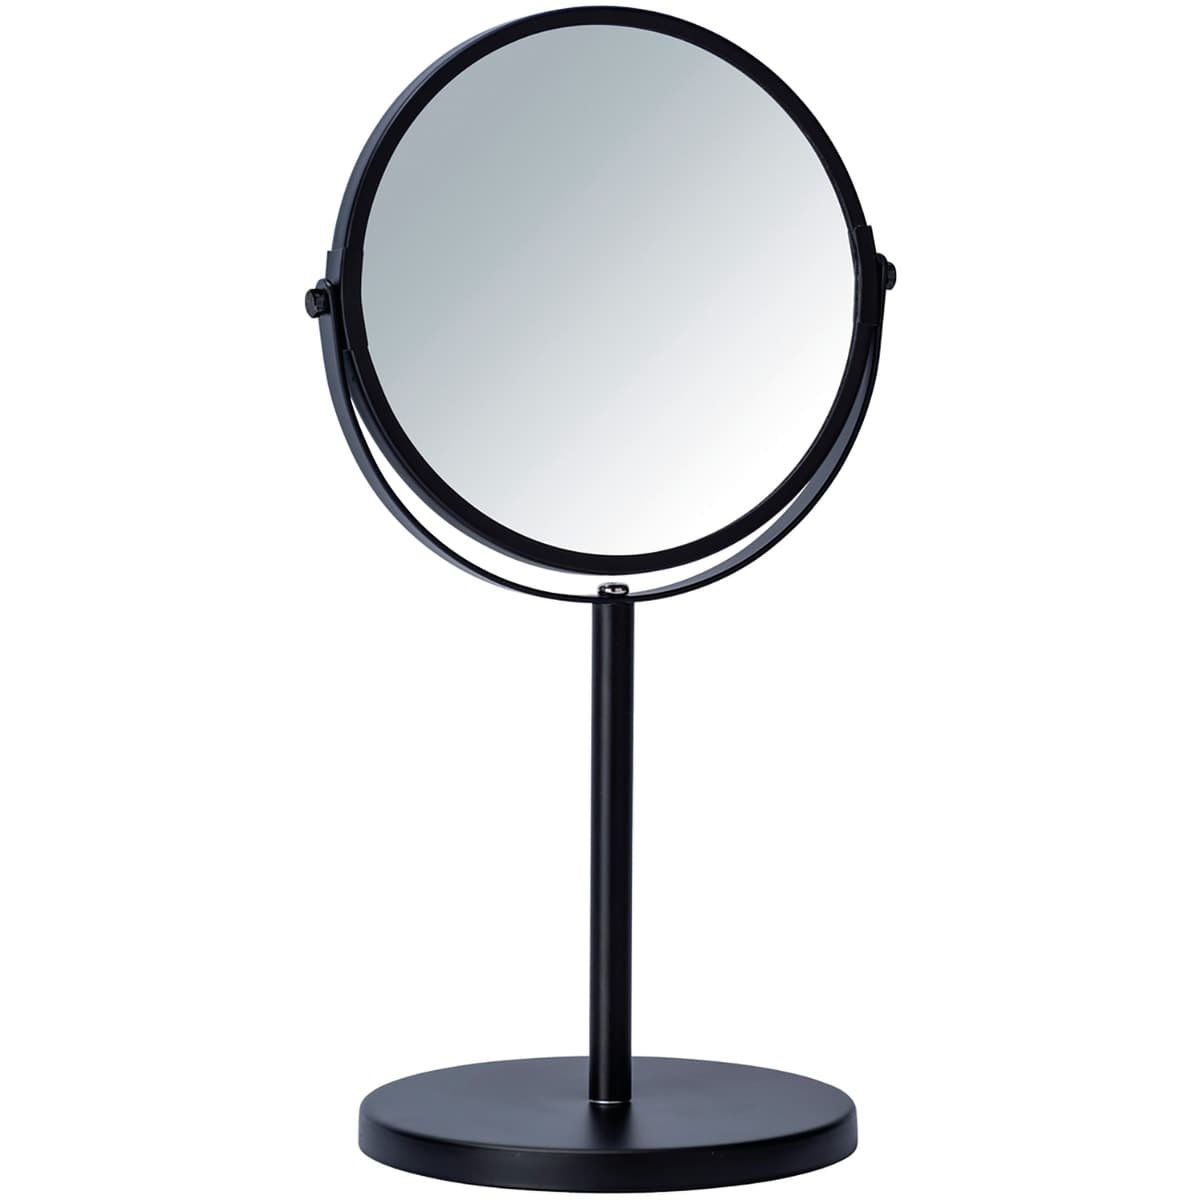 BLACK STAND-UP MAGNIFYING MIRROR ASSISI - best price from Maltashopper.com BR430007777